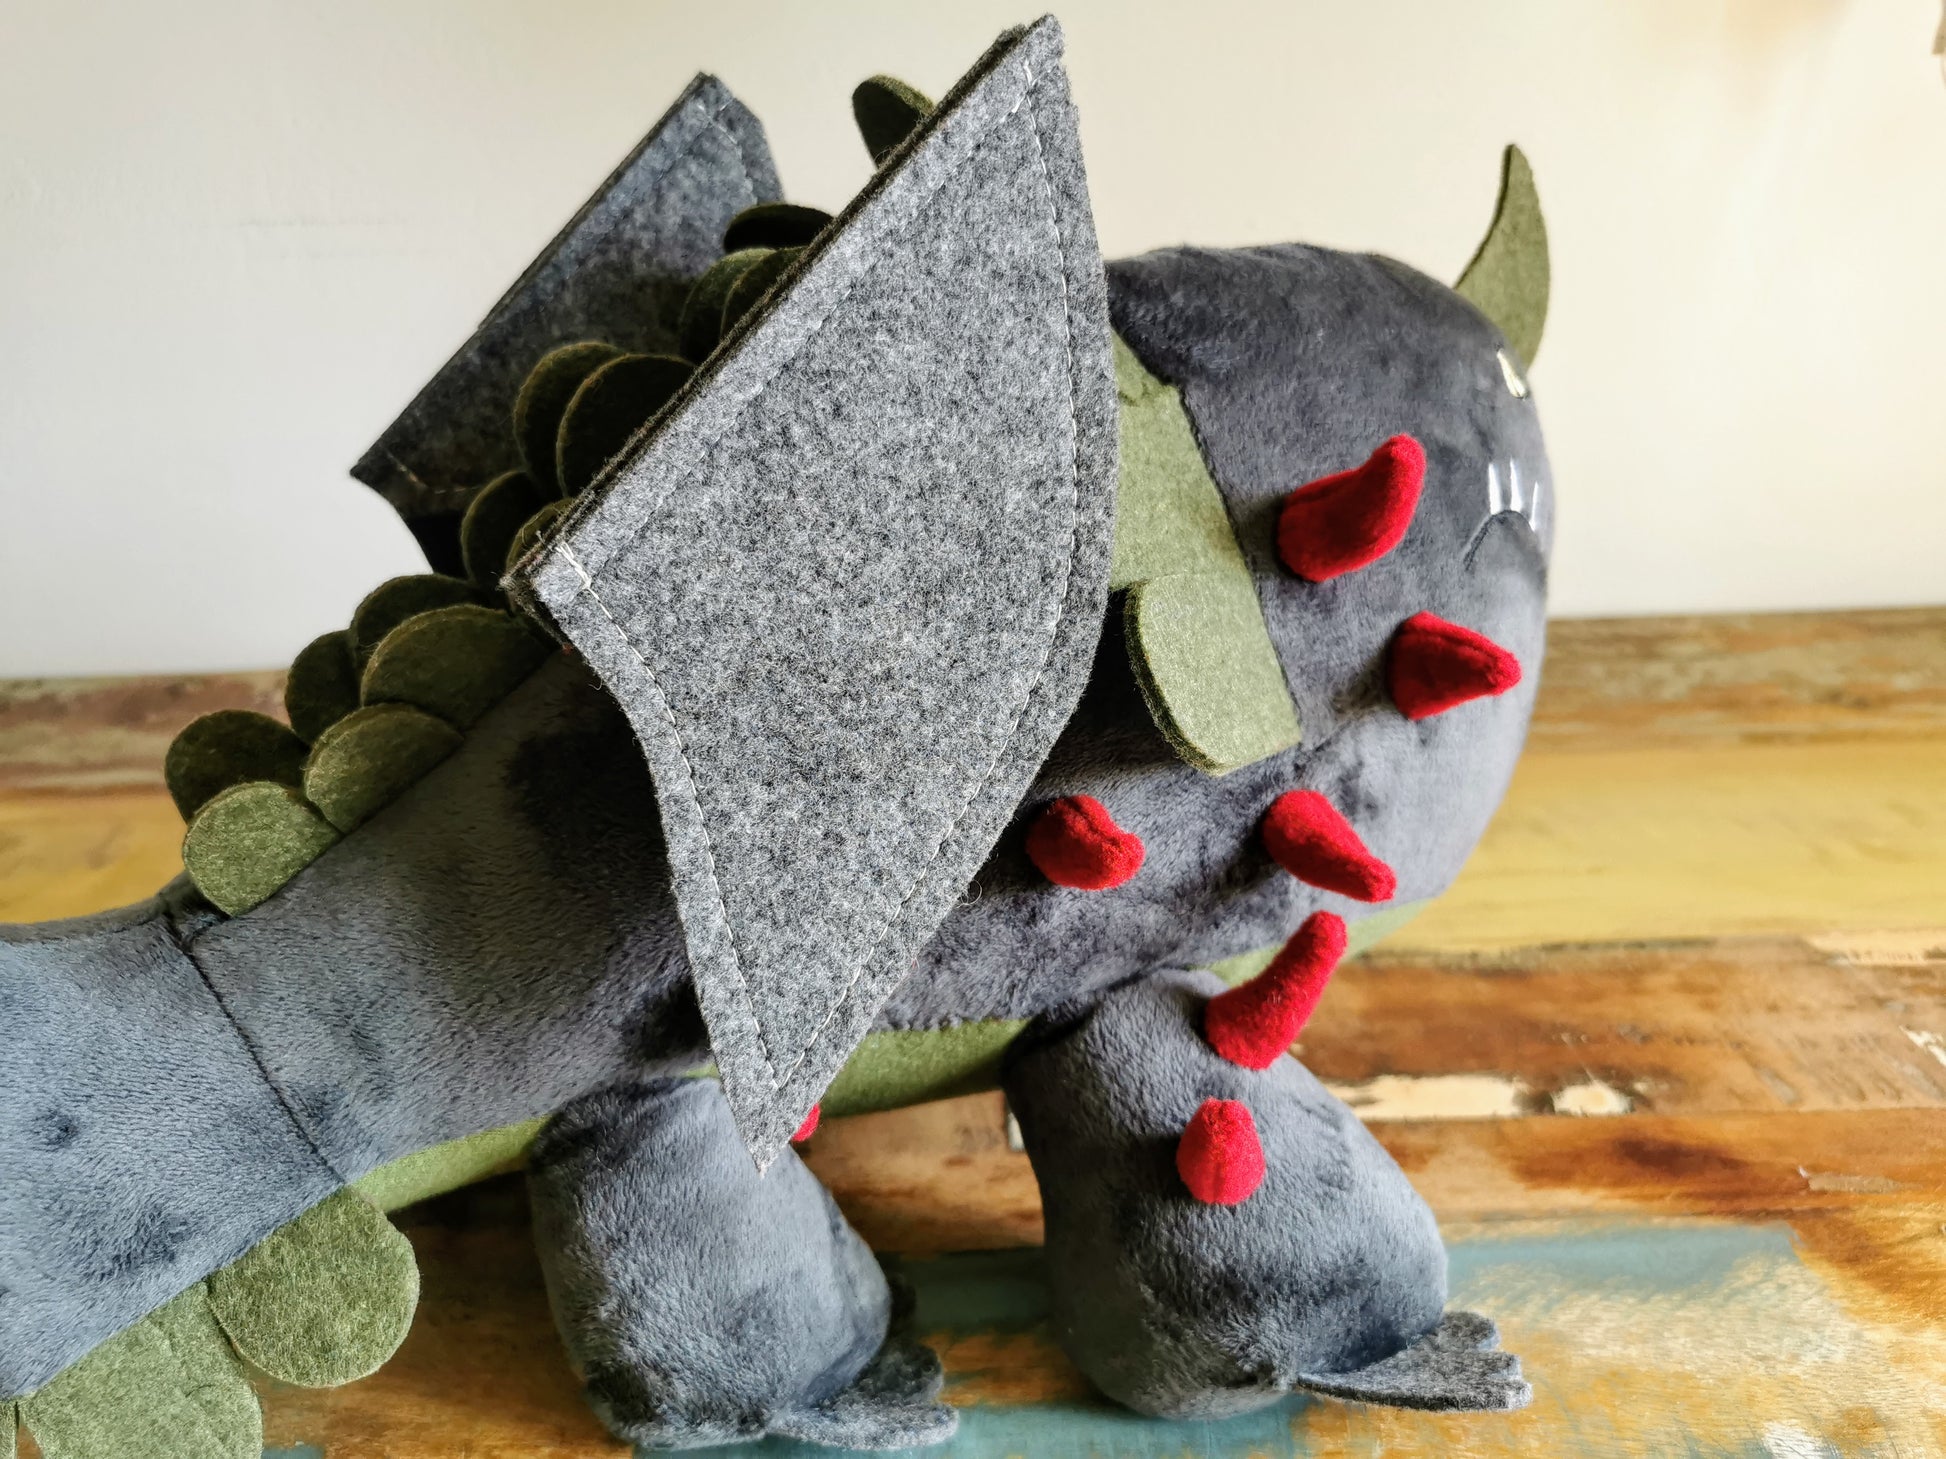 SIMPLE PLUSH TUTORIAL: It's kill or be killed! How to make